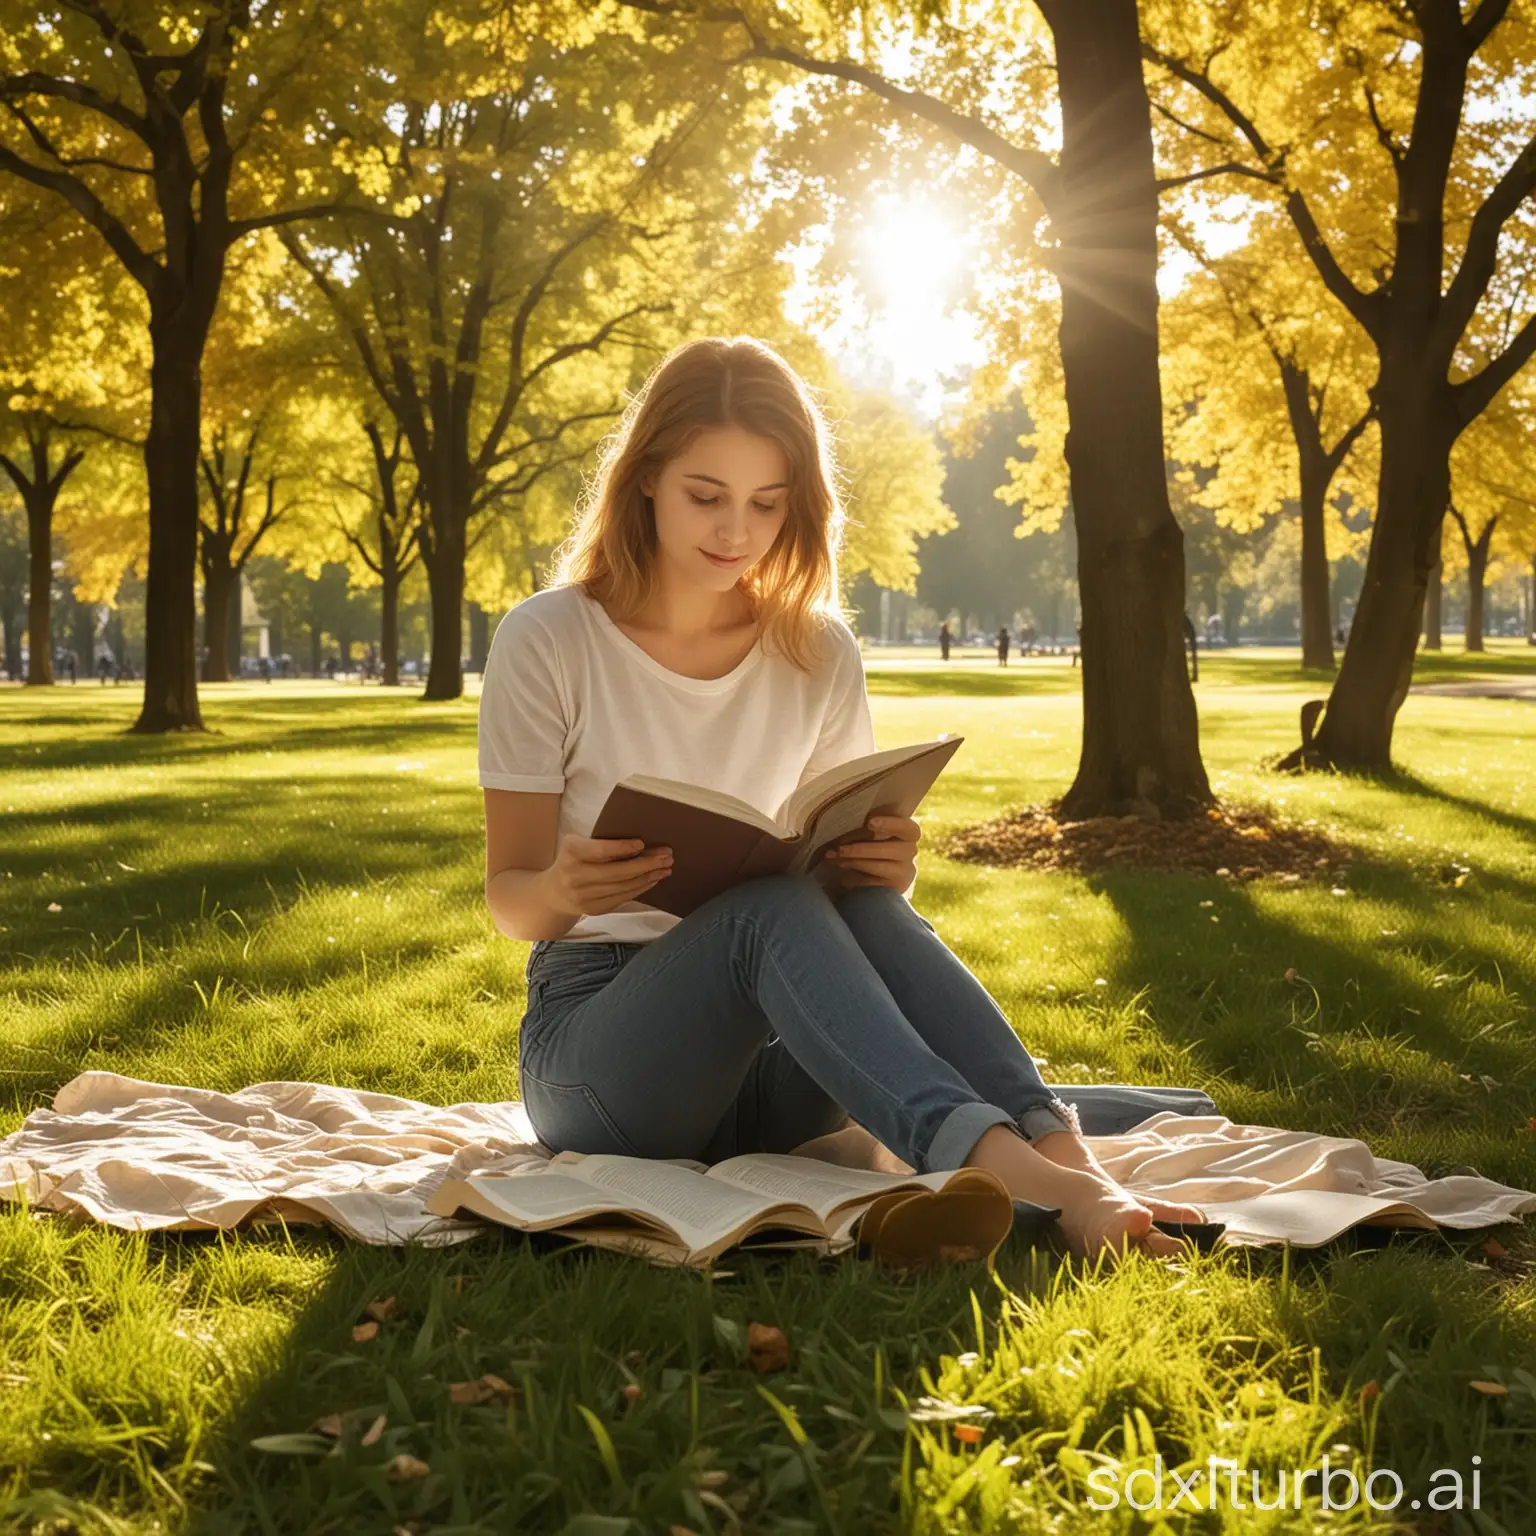 Relaxing-in-Sunlight-Reading-a-Book-in-the-Park